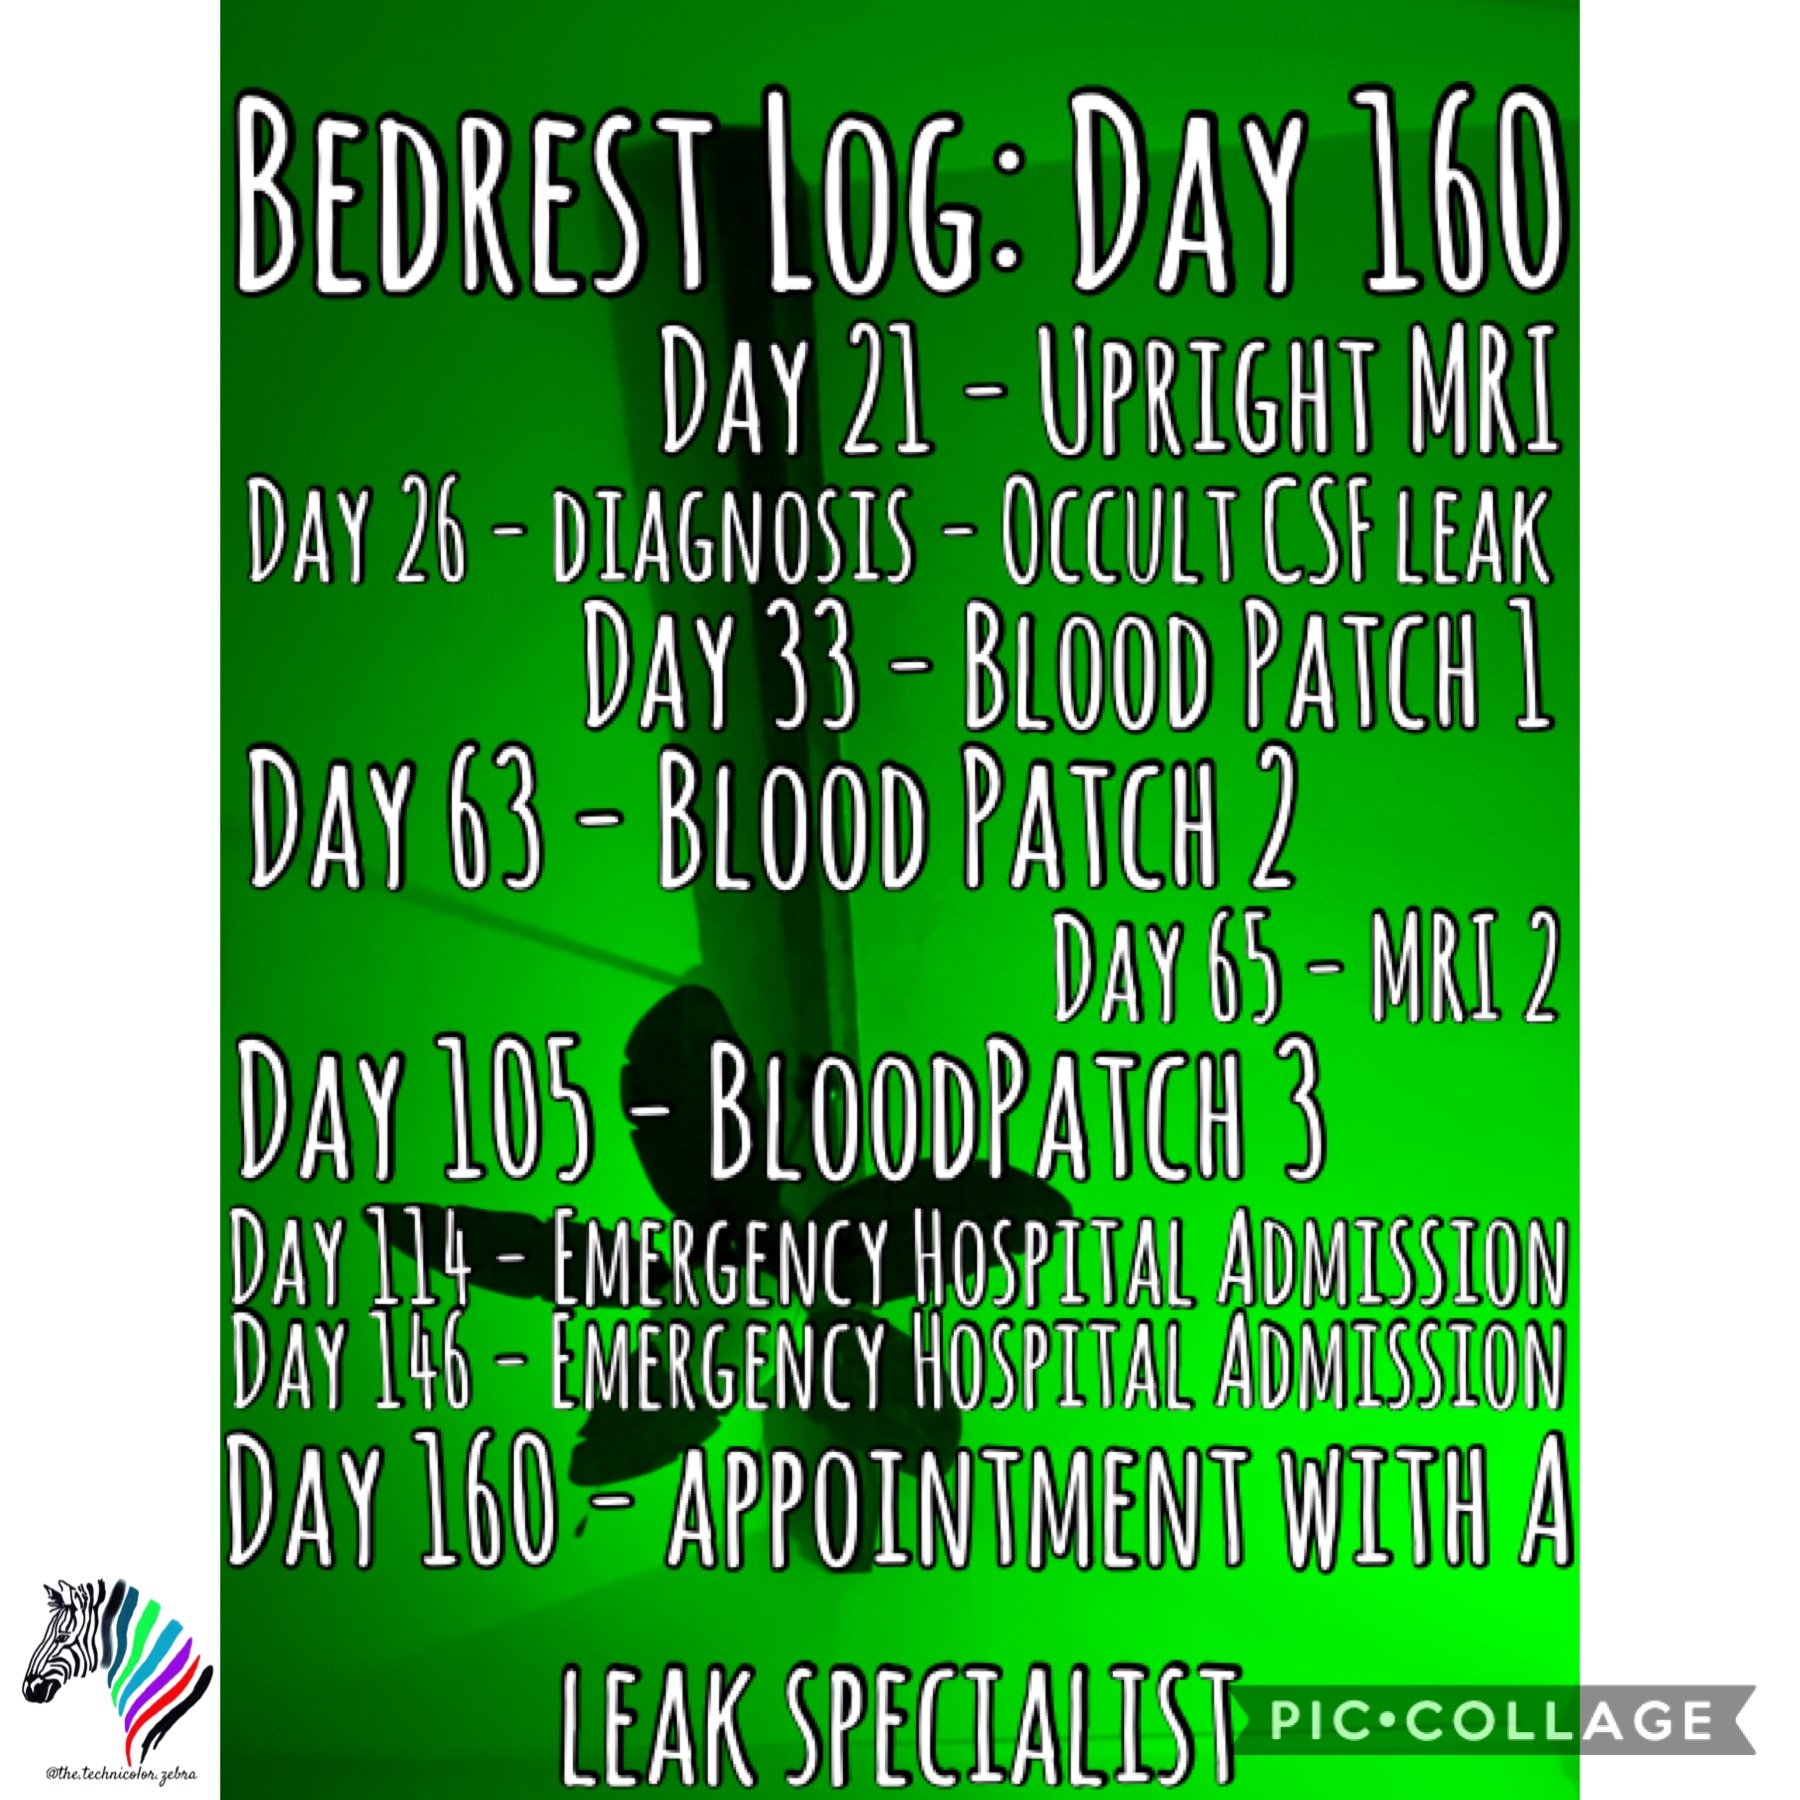 Image of a ceiling with a fan in green light.  Words are overlaid saying "Bedrest Log - Day 160, Day 21 - Upright MRI, Day 26 - Occult CSF Leak Diagnosis, Day 33 - Blood Patch 1, Day 63 - Blood Patch 2, Day 65 - MRI #2, Day 105 - Blood Patch 3, Day 114 - Emergency Hospital Admission, Day 146 - Second Emergency Hospital Admission, Day 160 - Appointment with a CSF Leak Specialist"